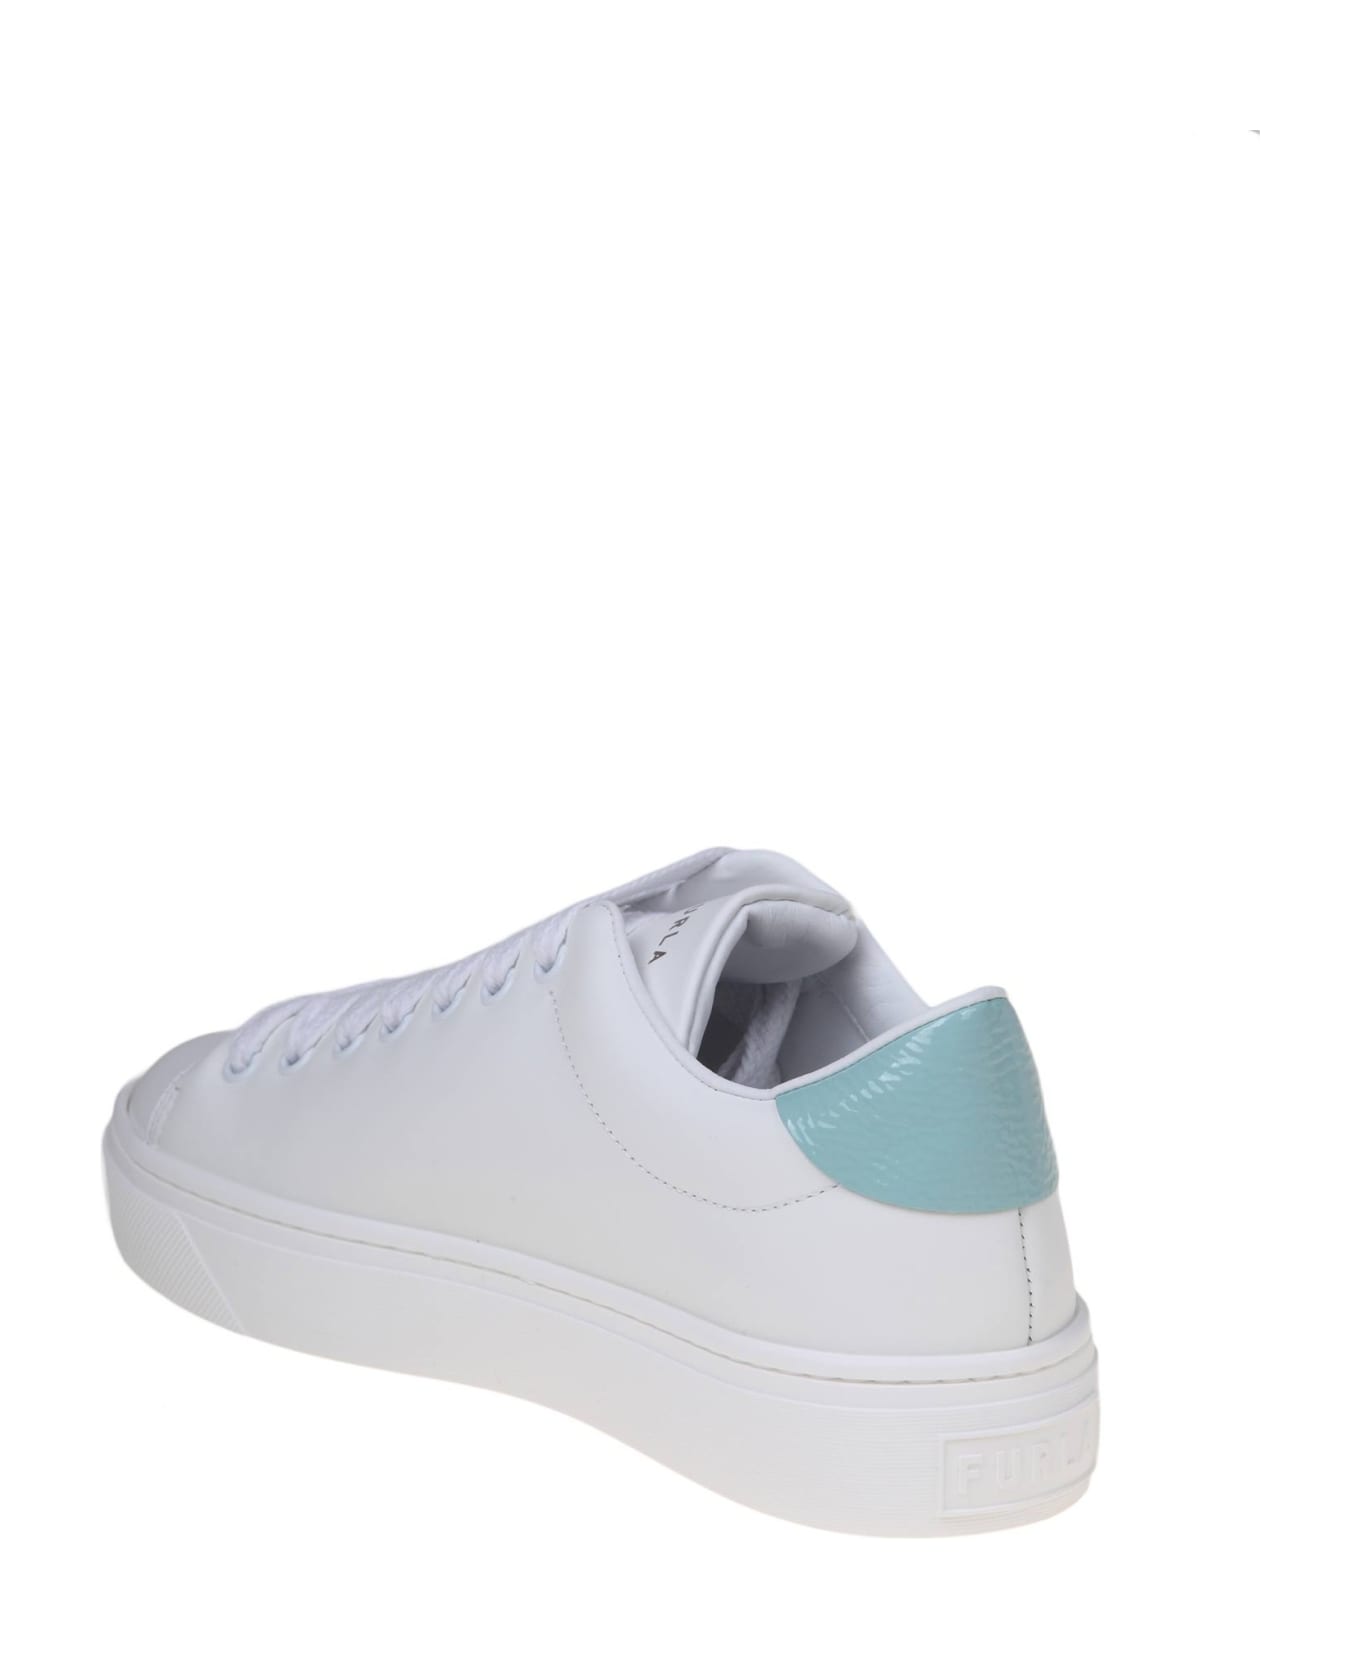 Furla Joy Lace Up Sneakers In White Leather - Green